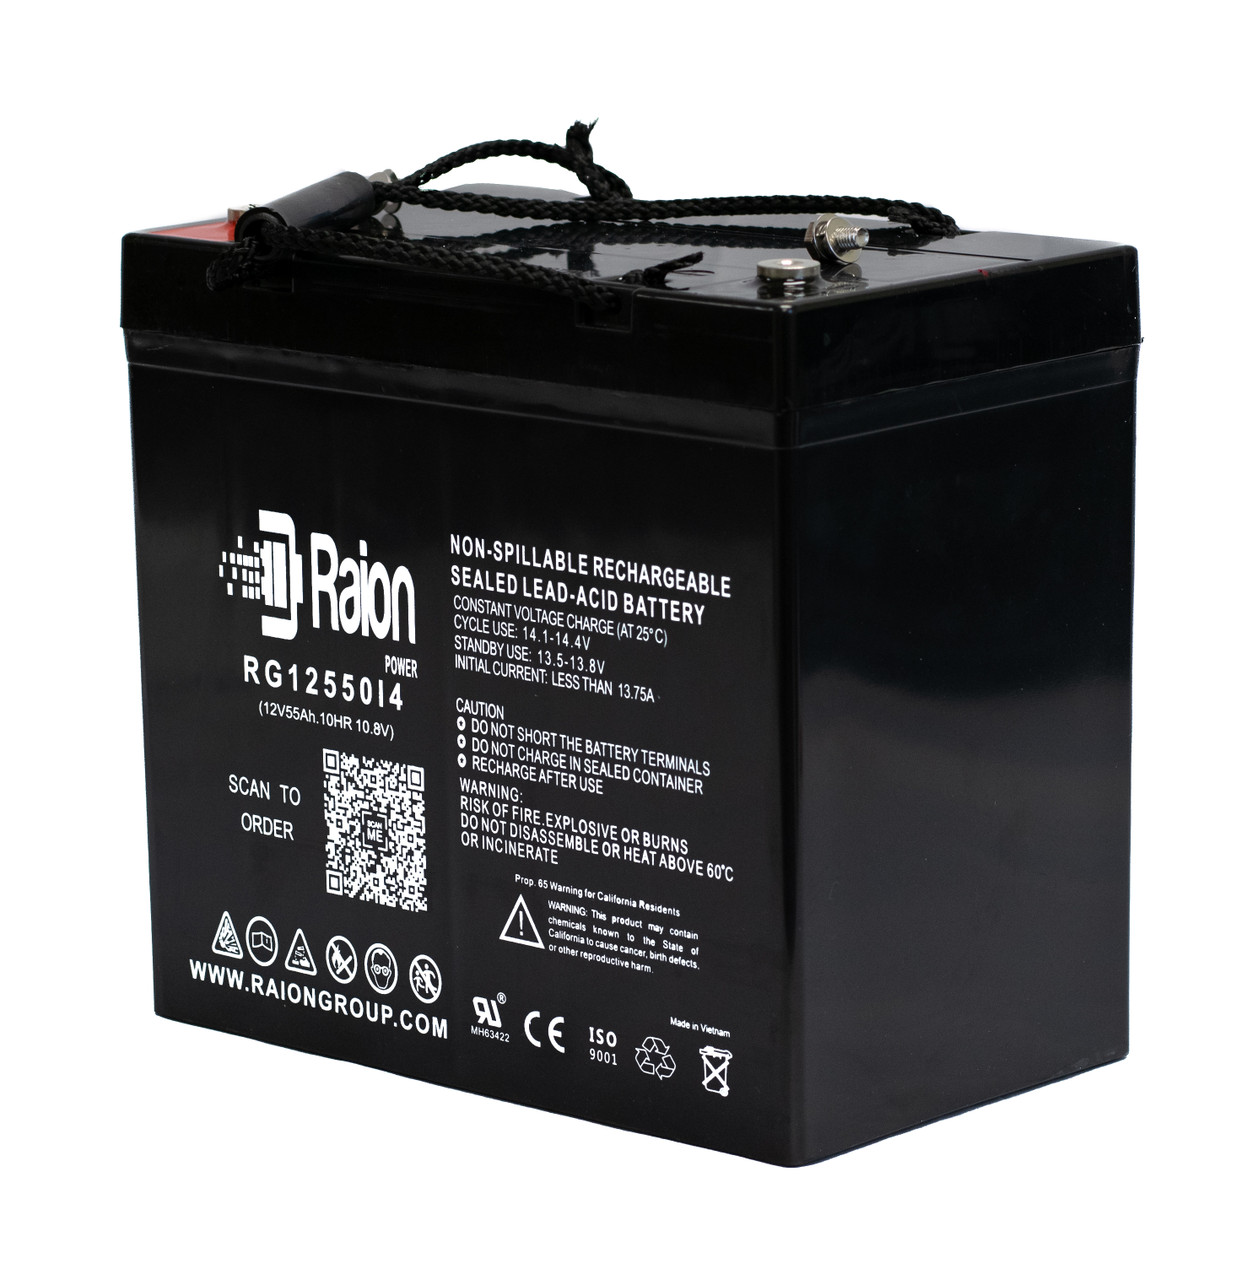 Raion Power 12V 55Ah 22NF Mobility Scooter Battery Replacement for Fortress Scientific 2001LX